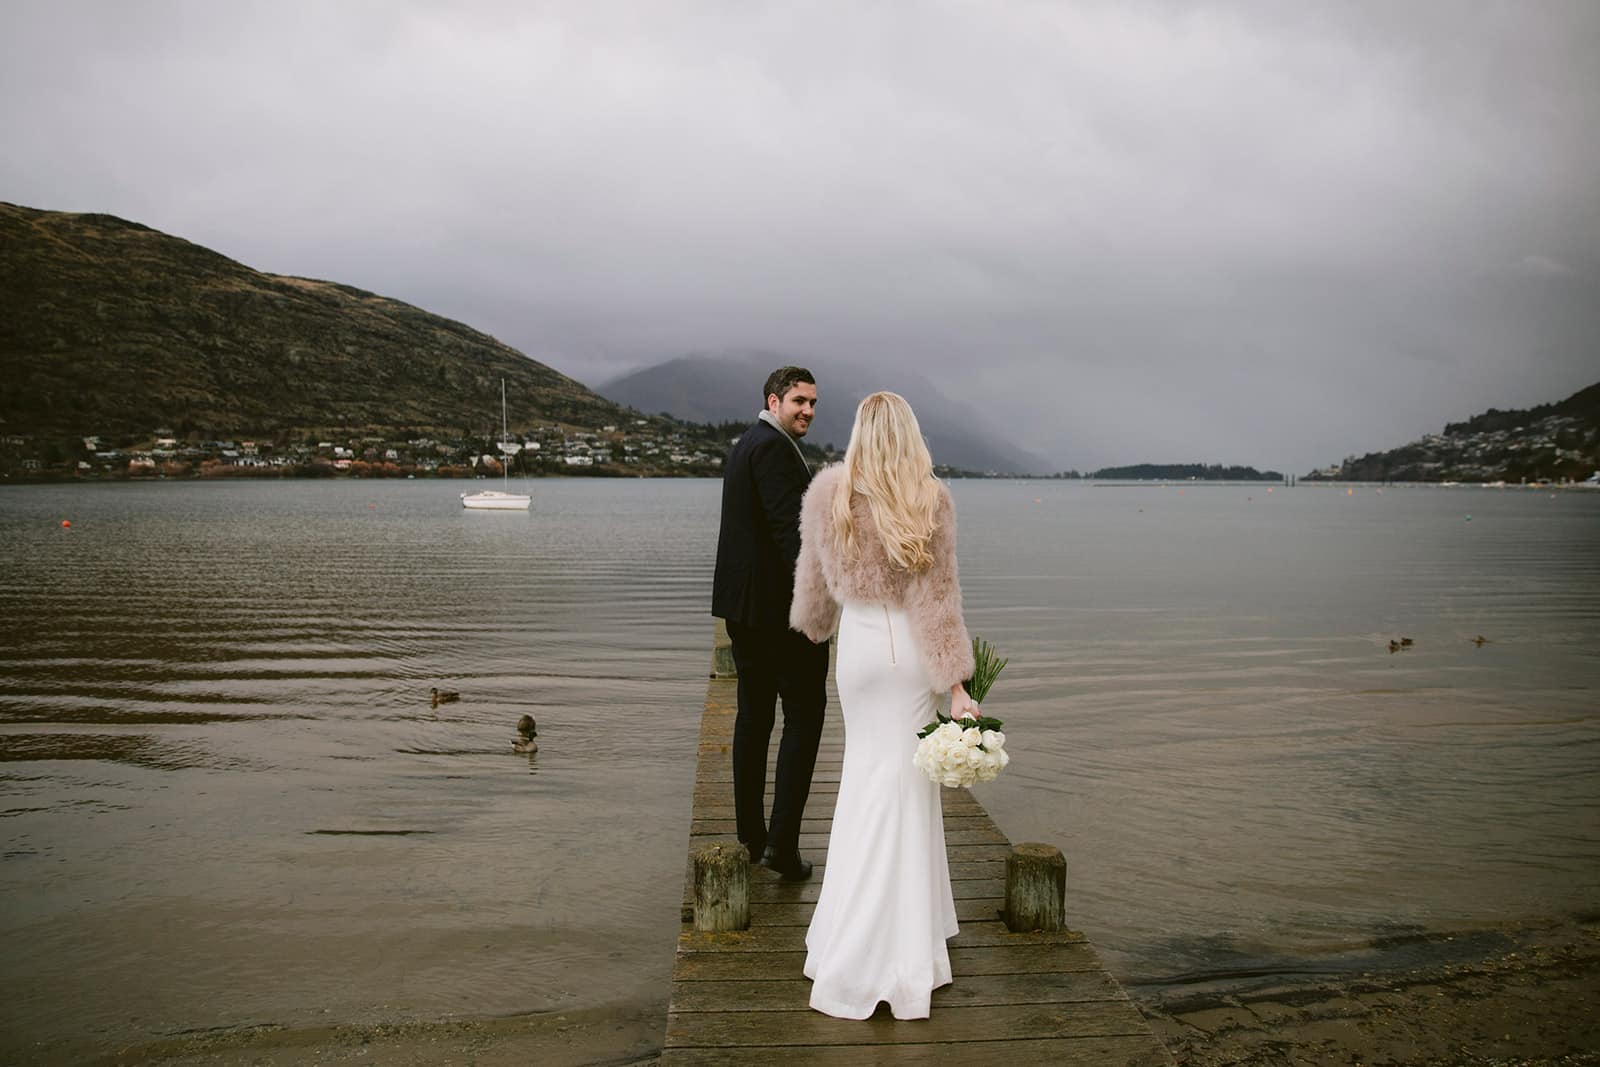 Heli Wedding in Queenstown New Zealand on a rainy day